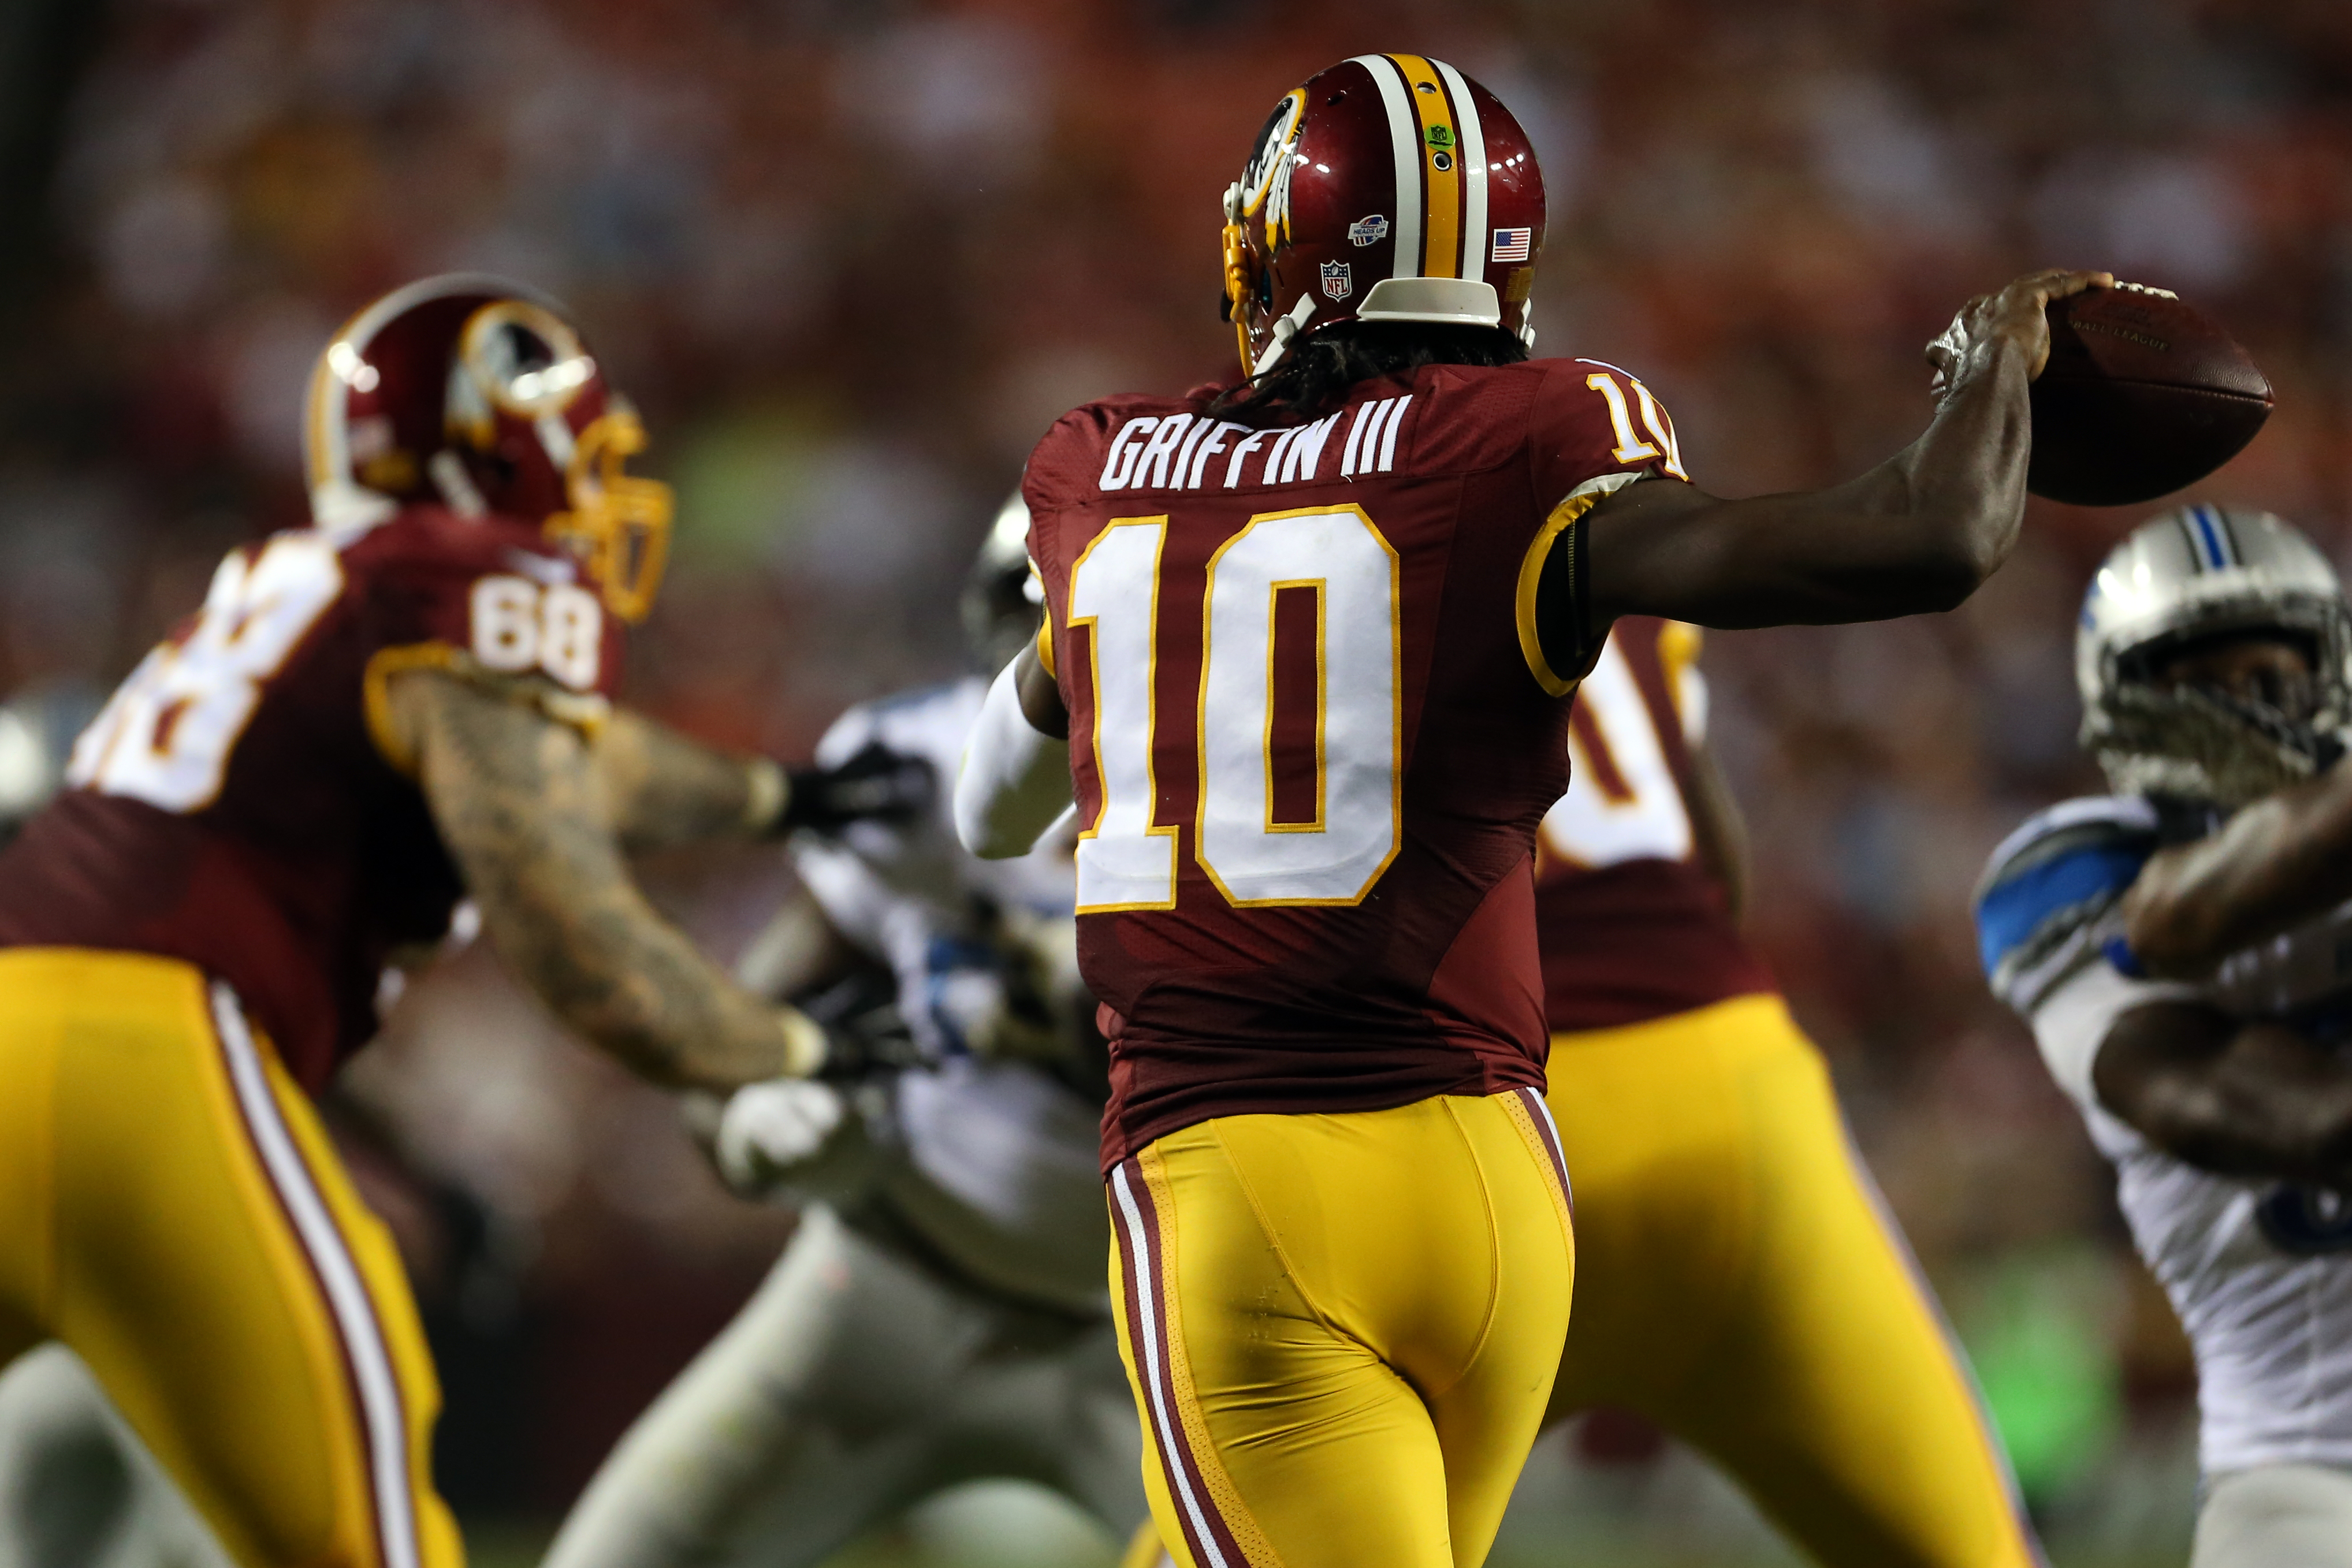 Robert Griffin III injured early in game vs. Jaguars – The Denver Post